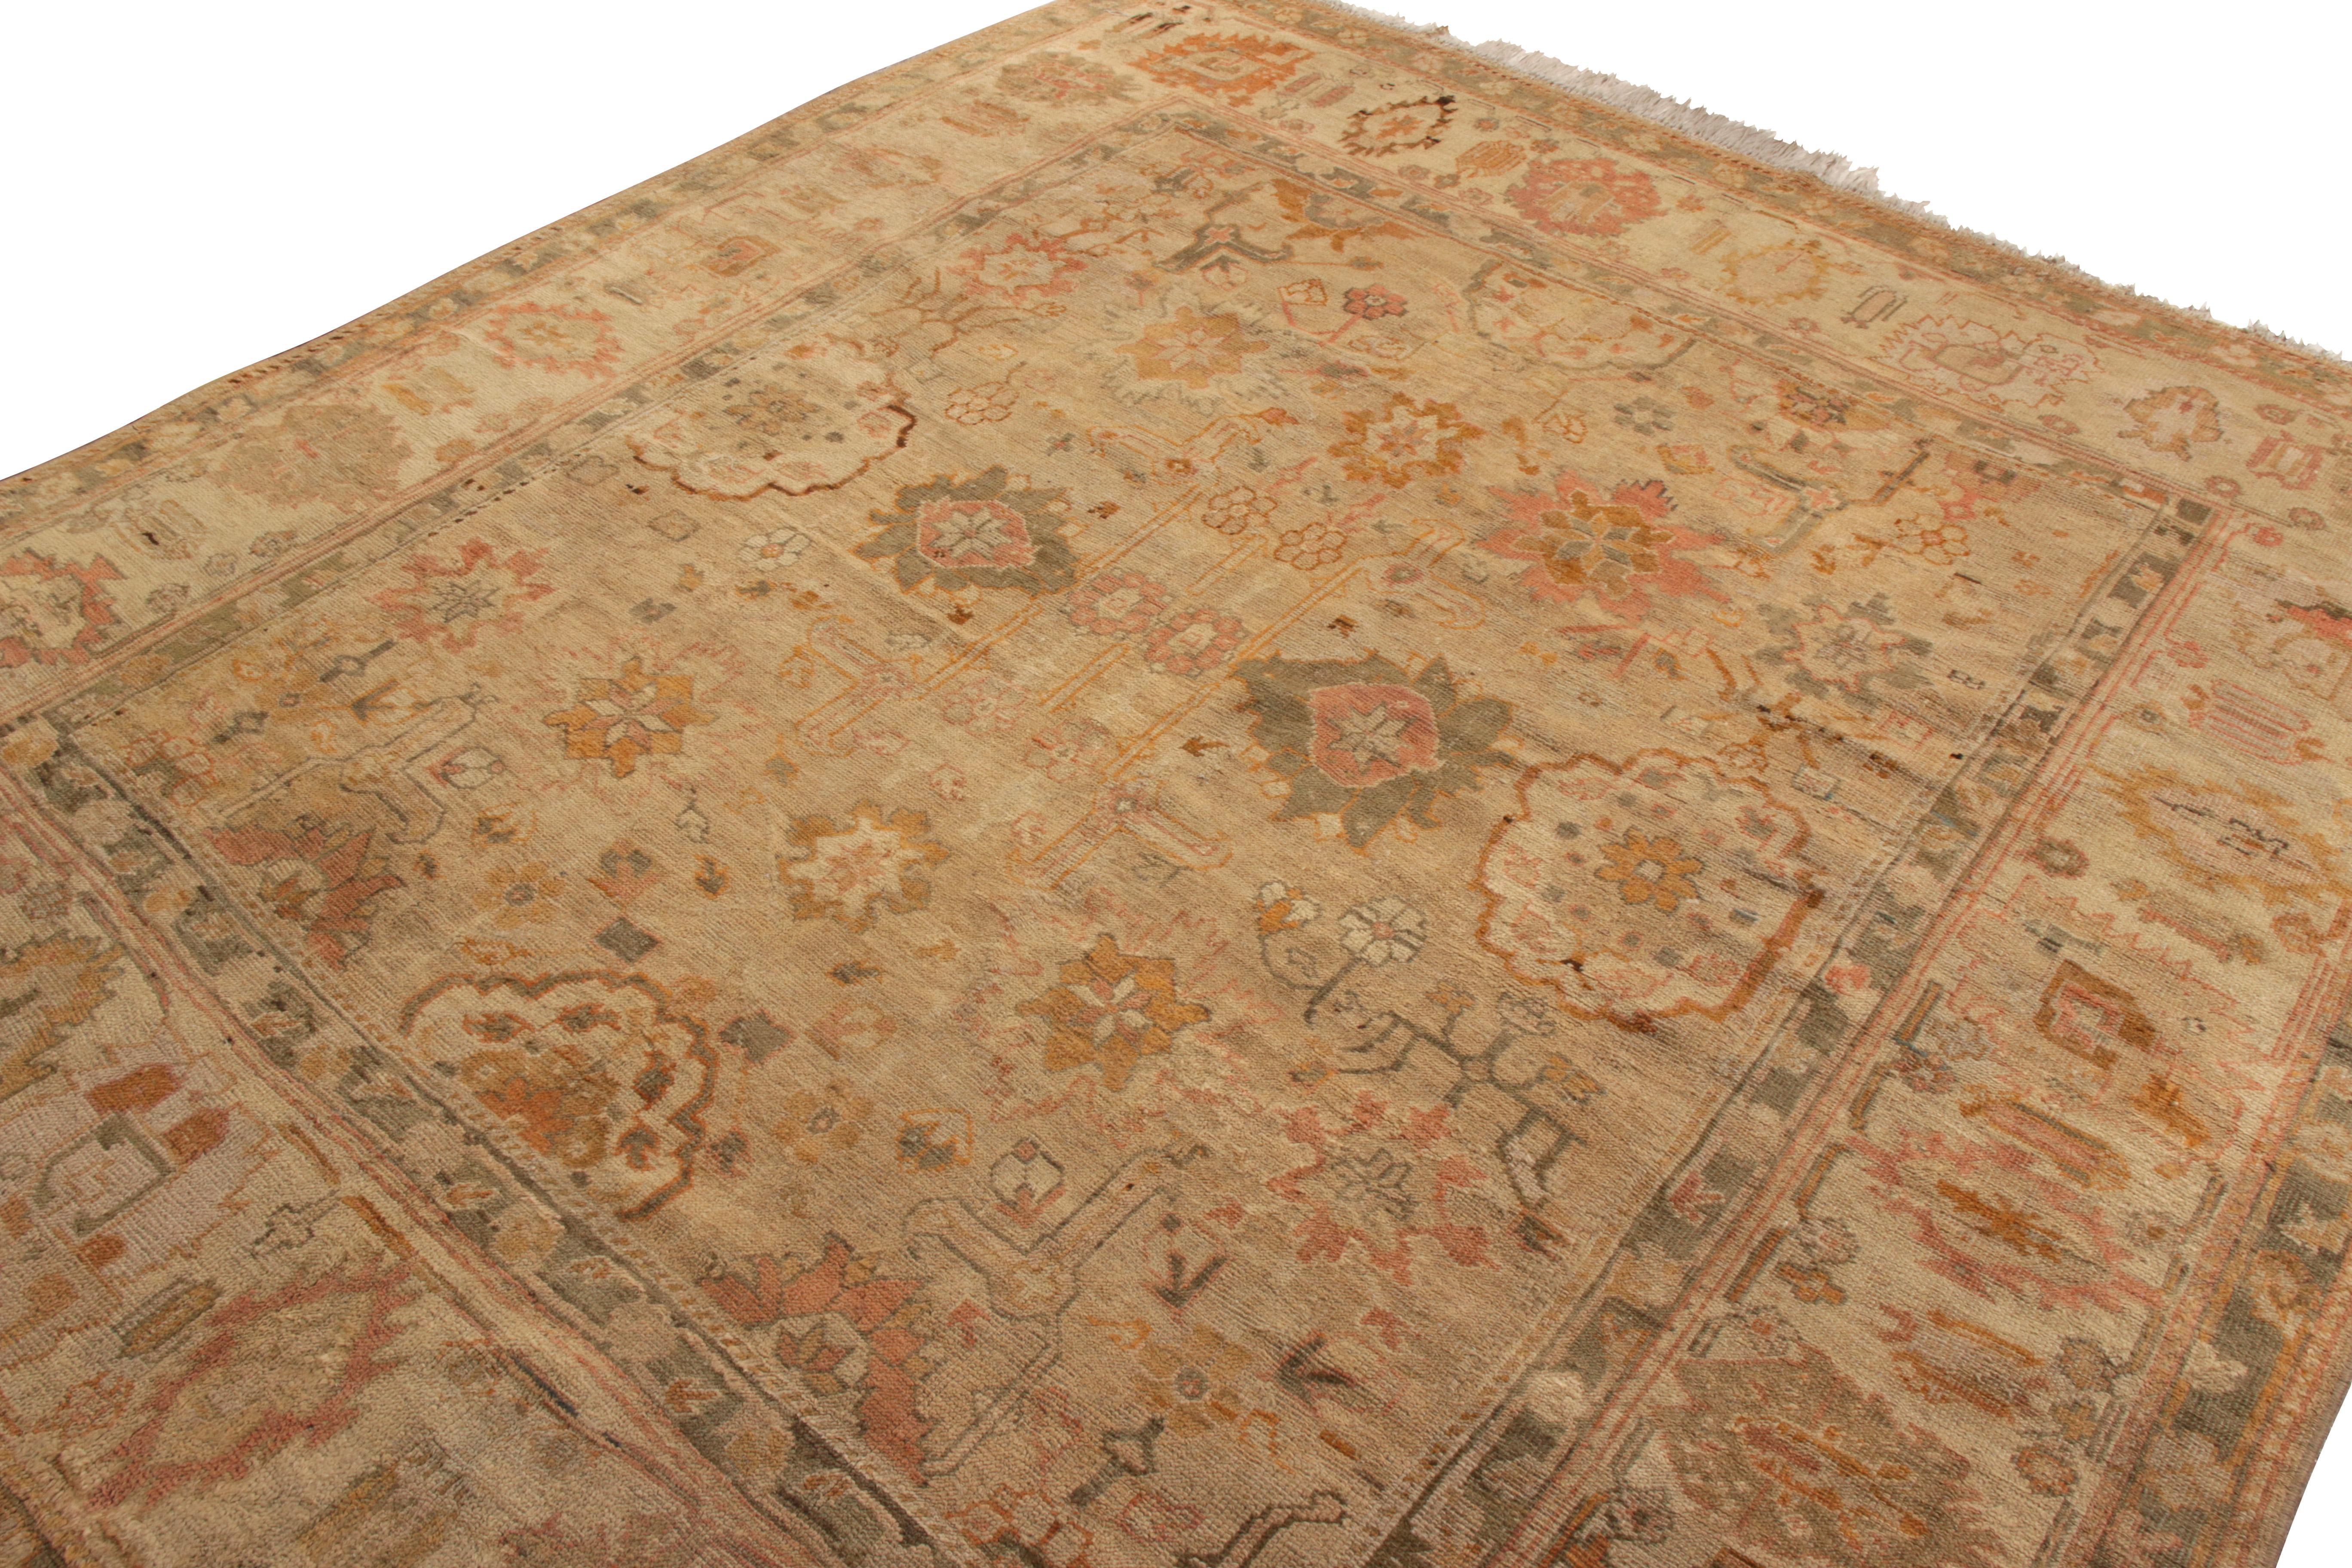 Hand-Knotted Antique Oushak Rug - Beige Pink Green Floral Pattern In Good Condition For Sale In Long Island City, NY